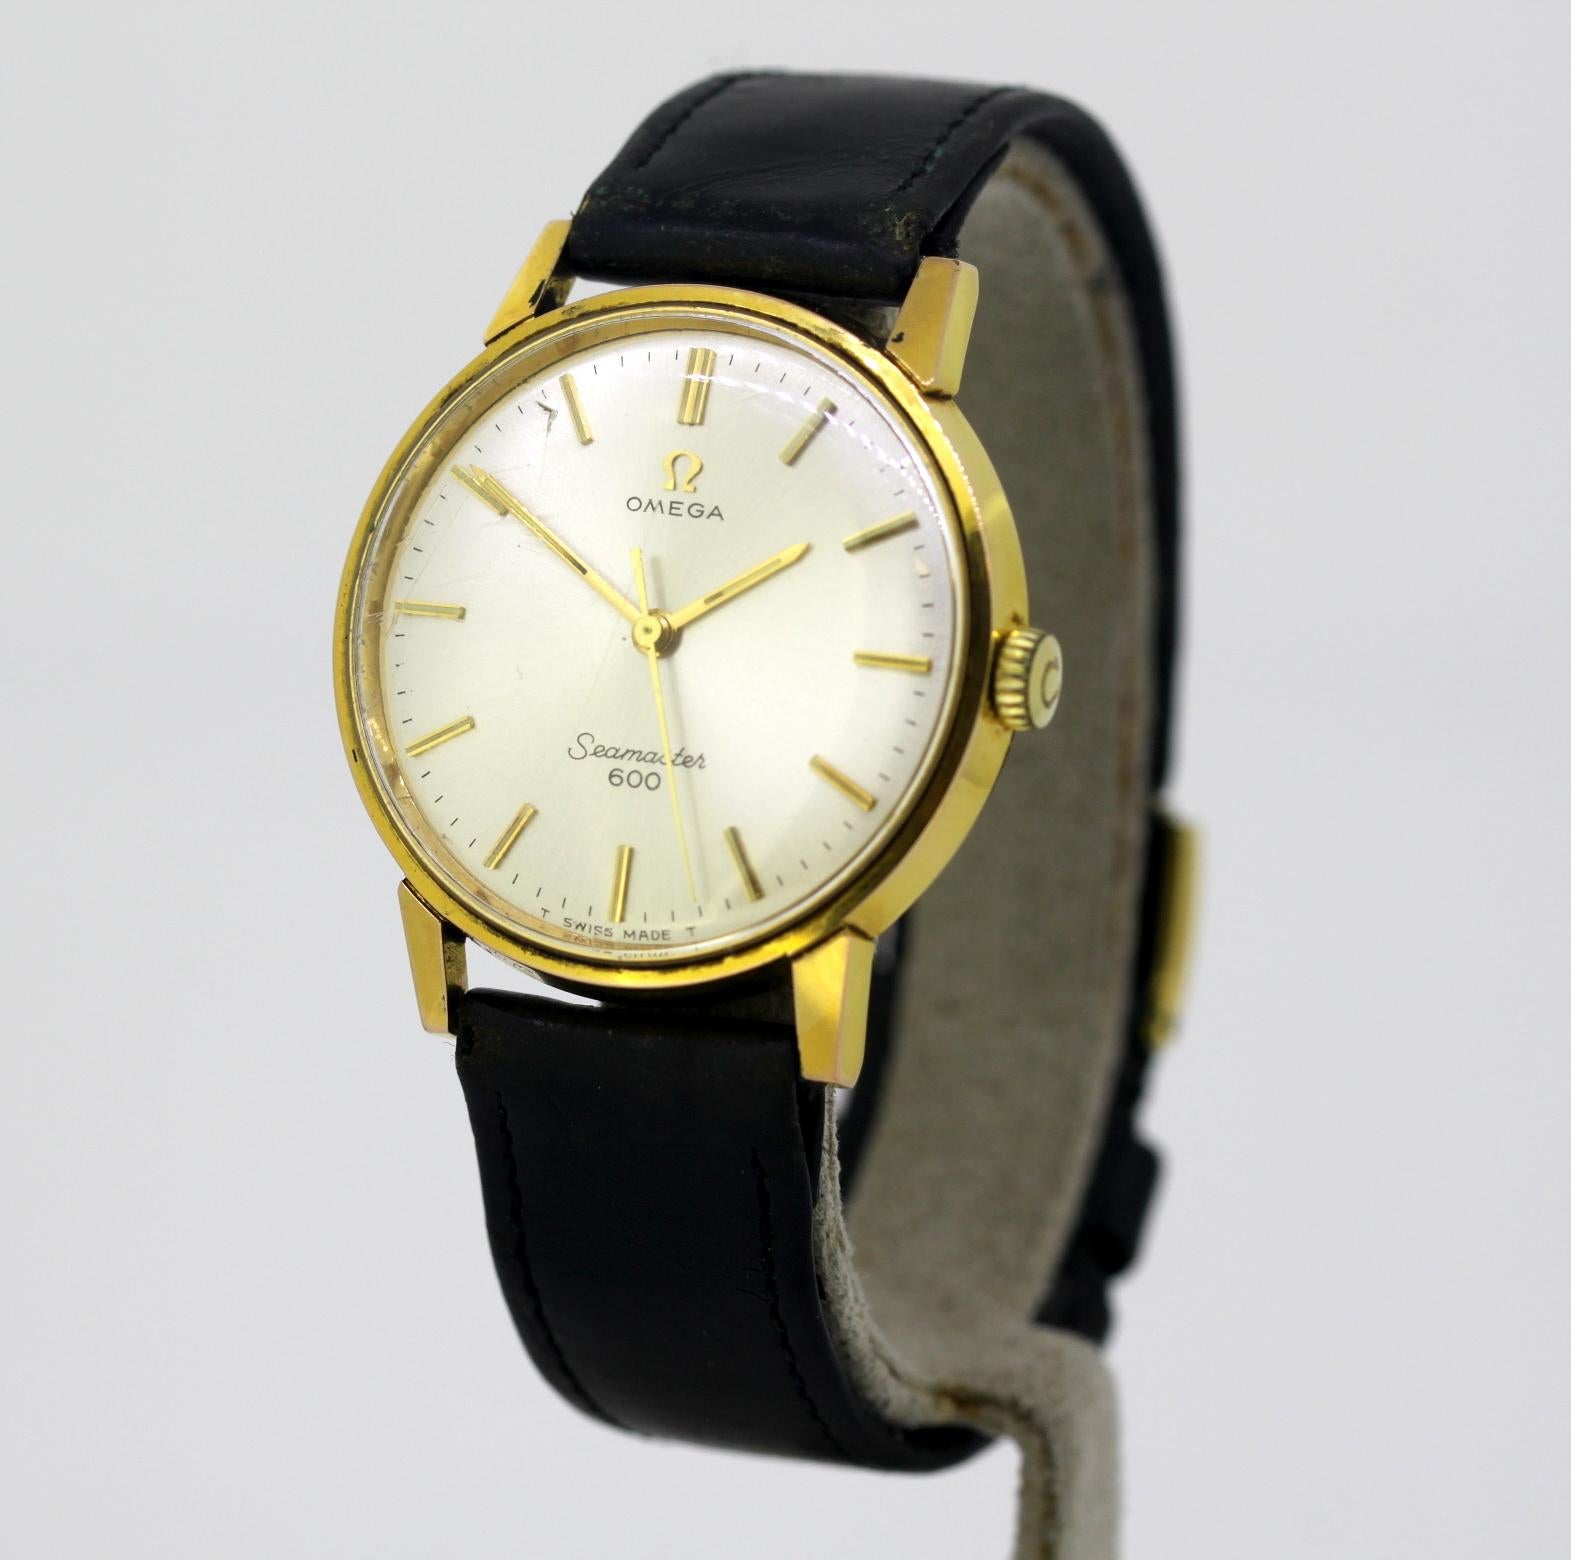 Omega Seamaster 600, vintage manual winding mens wristwatch, Circa 1960's

Gender: Men
Case Diameter : 34 mm
Movement: Manual Winding
Watchband Material: Omega Leather
Case material : Gold Plated
Display Type:	Analogue	
Dial: ( See Photos )
Year :